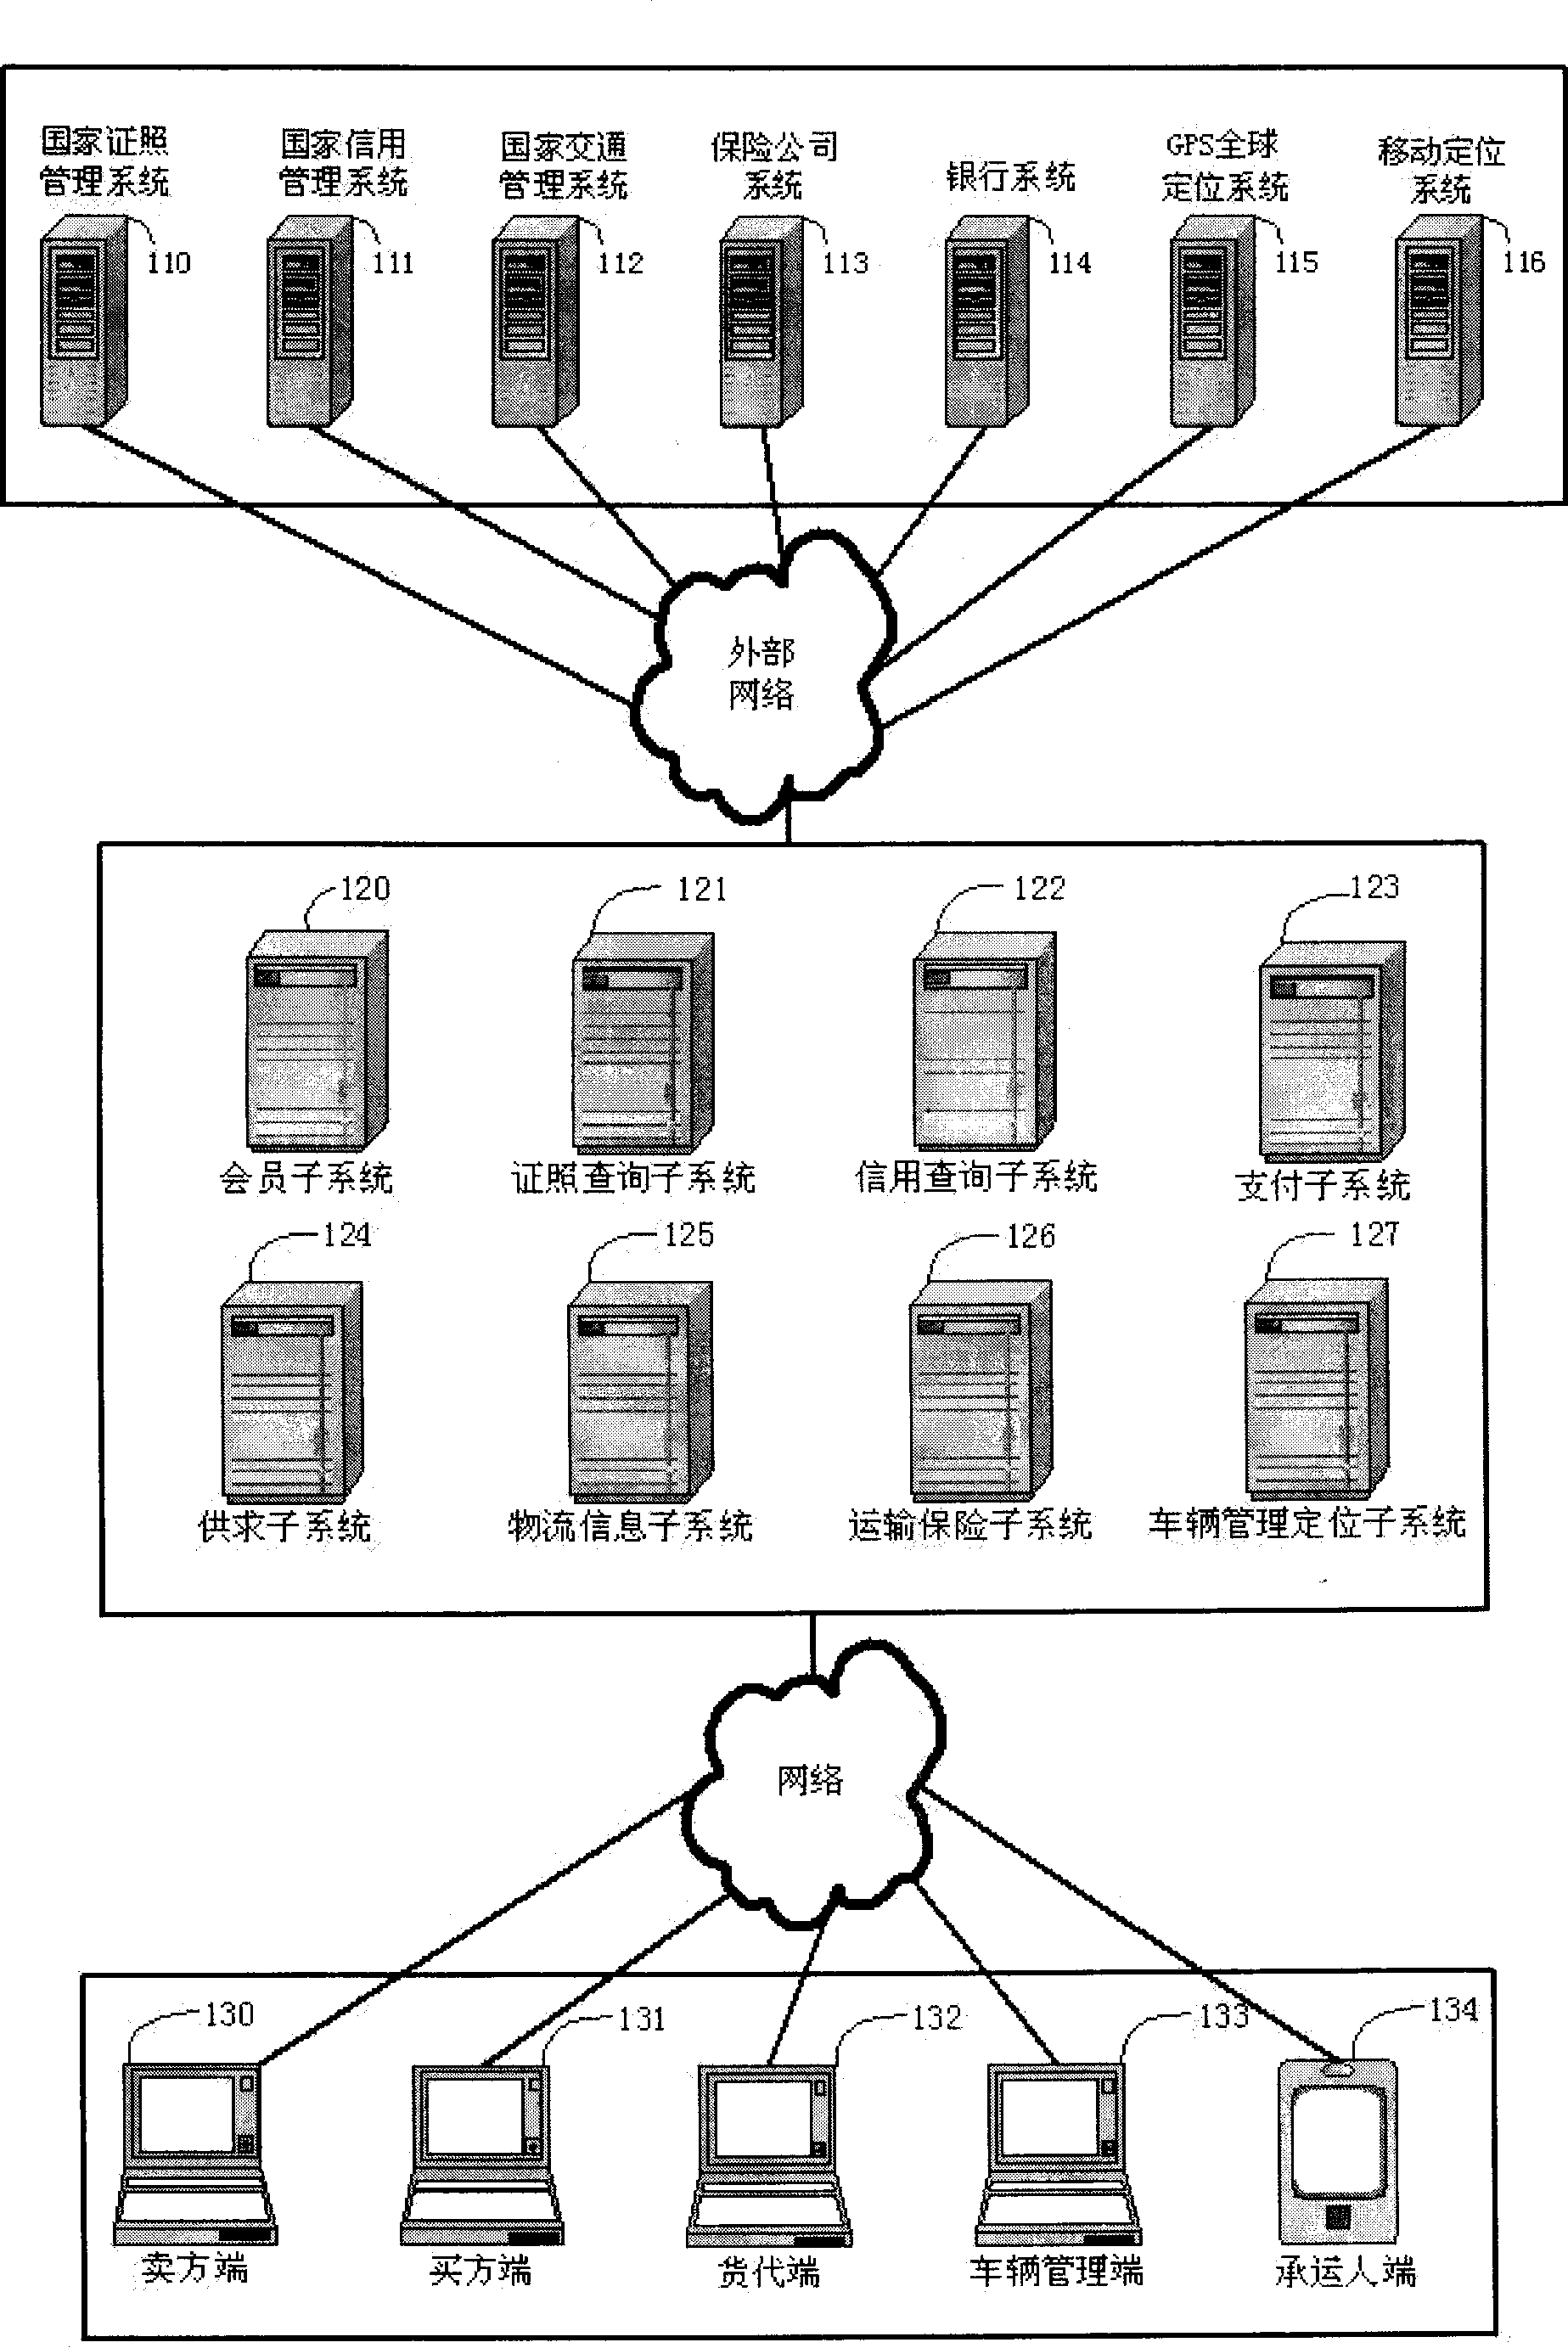 Supply chain management system and method